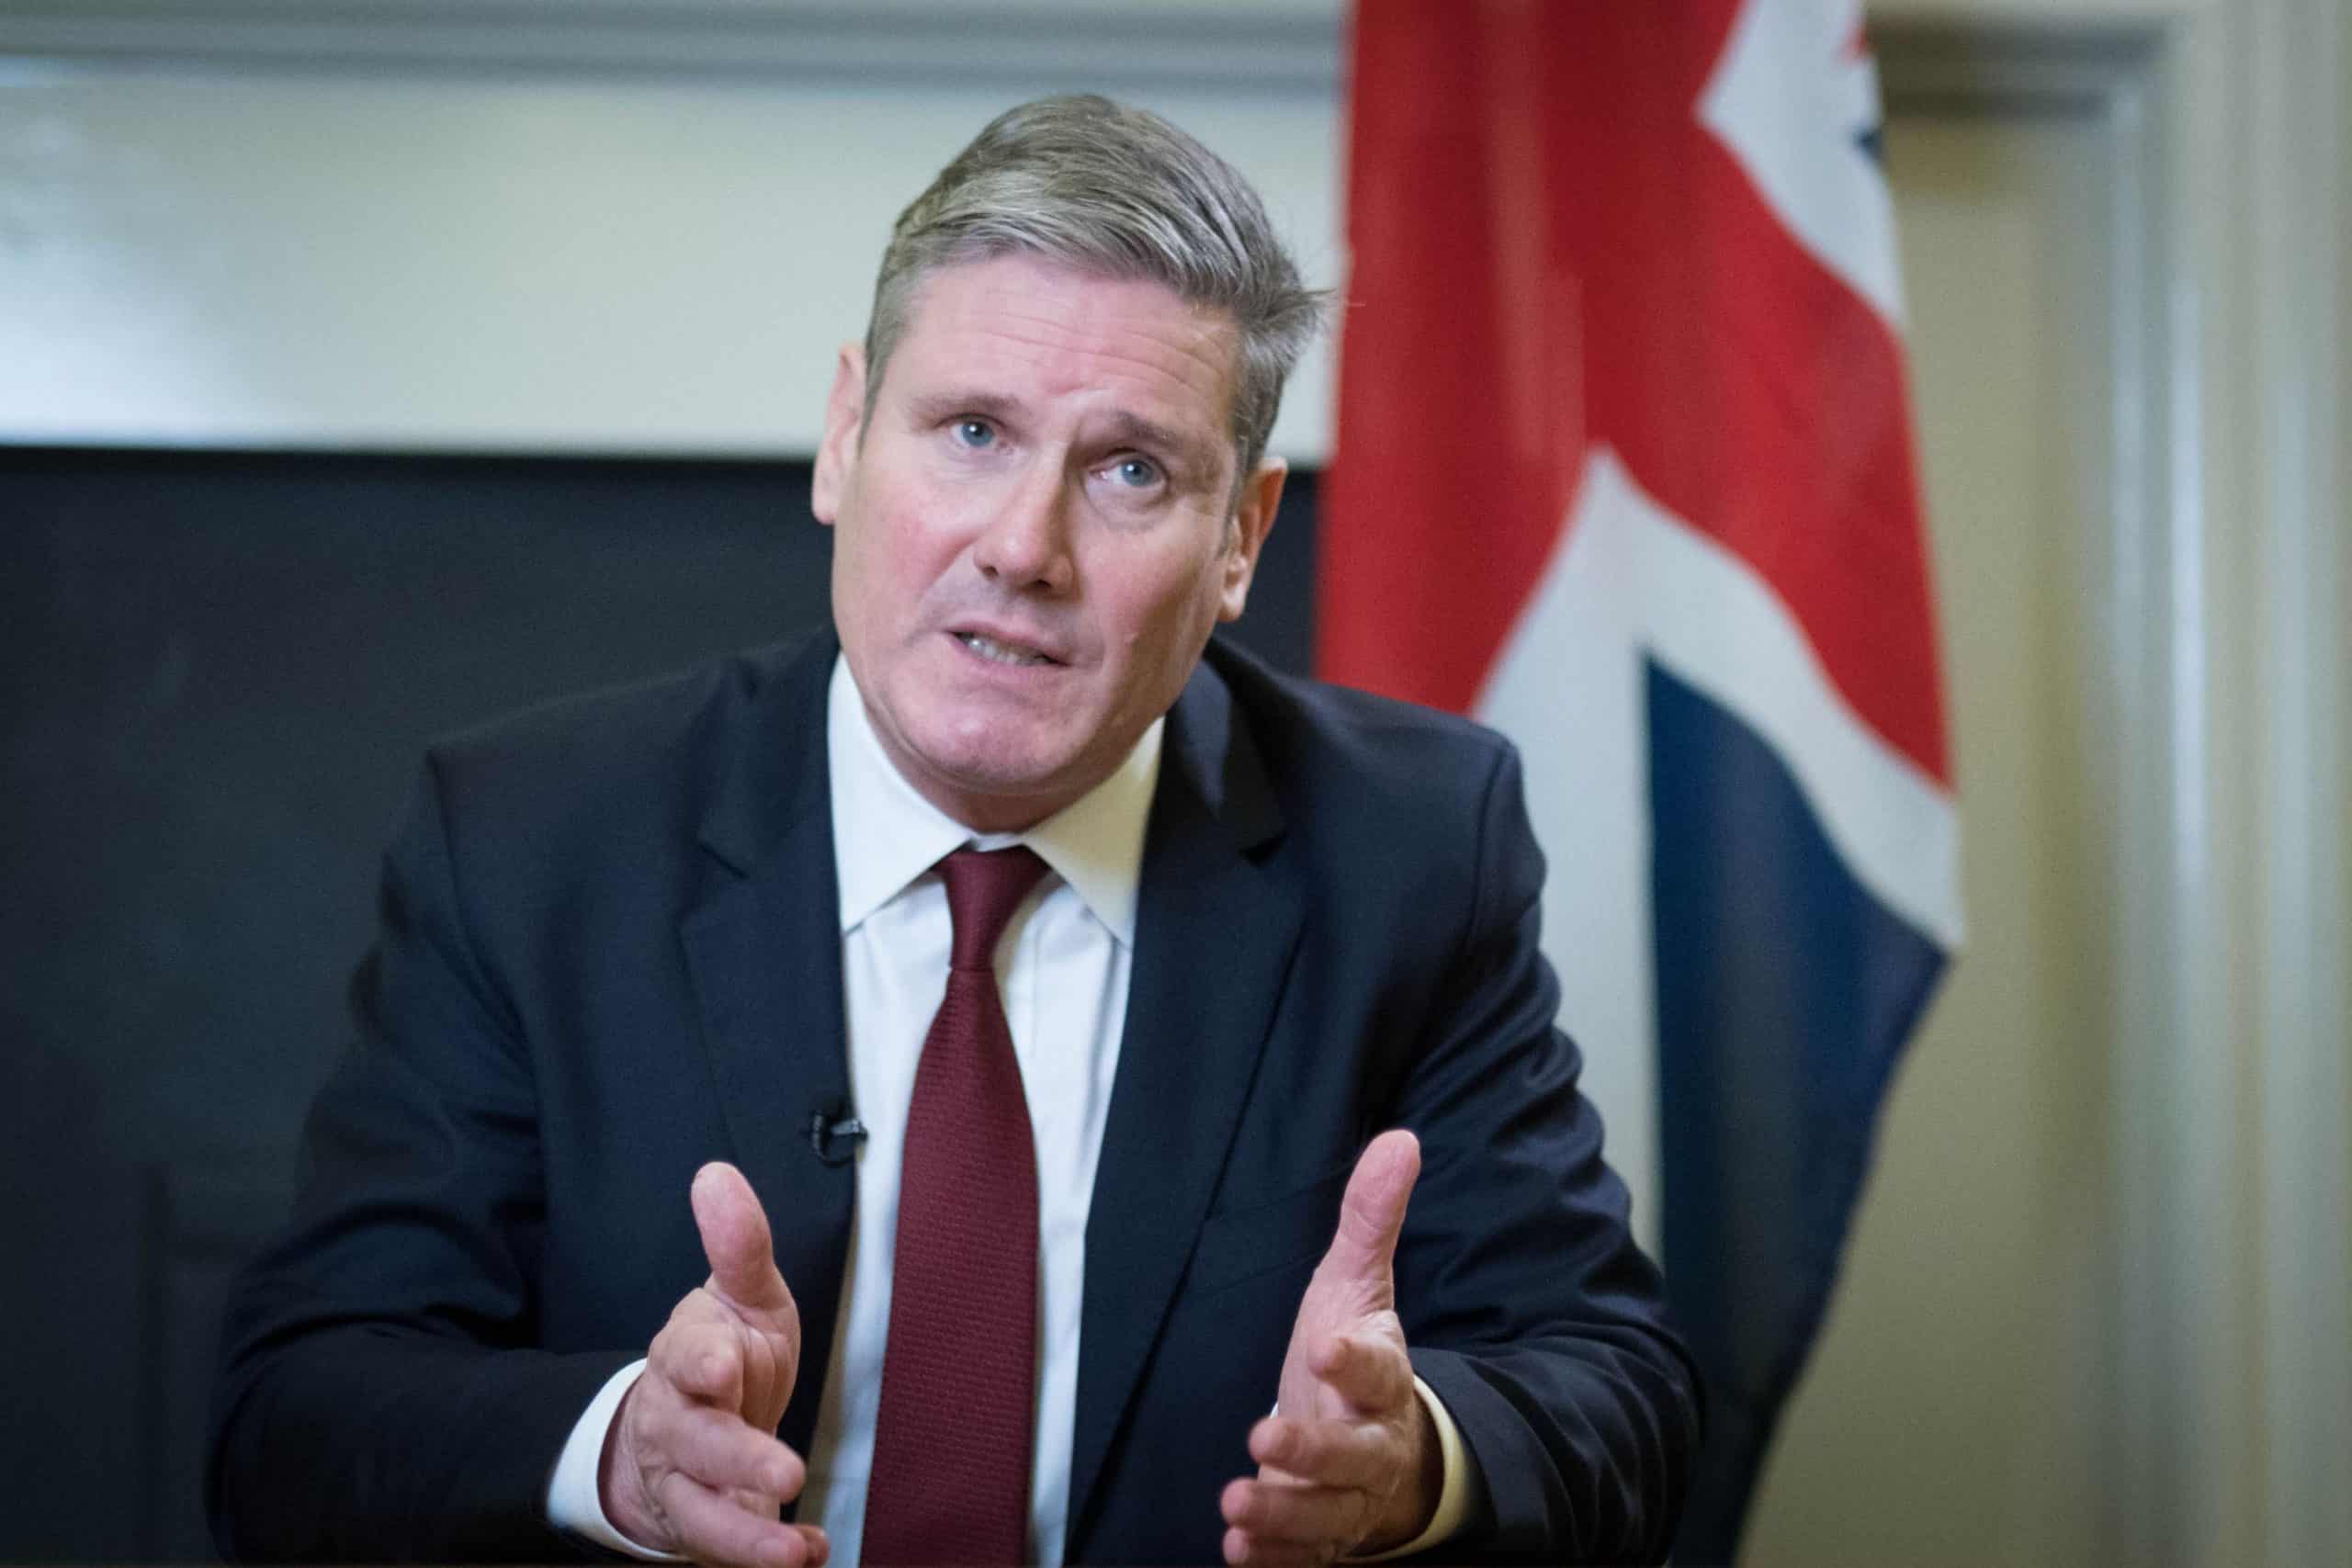 Bring forward self-iso exemption date to fight ‘pingdemic’, Starmer urges